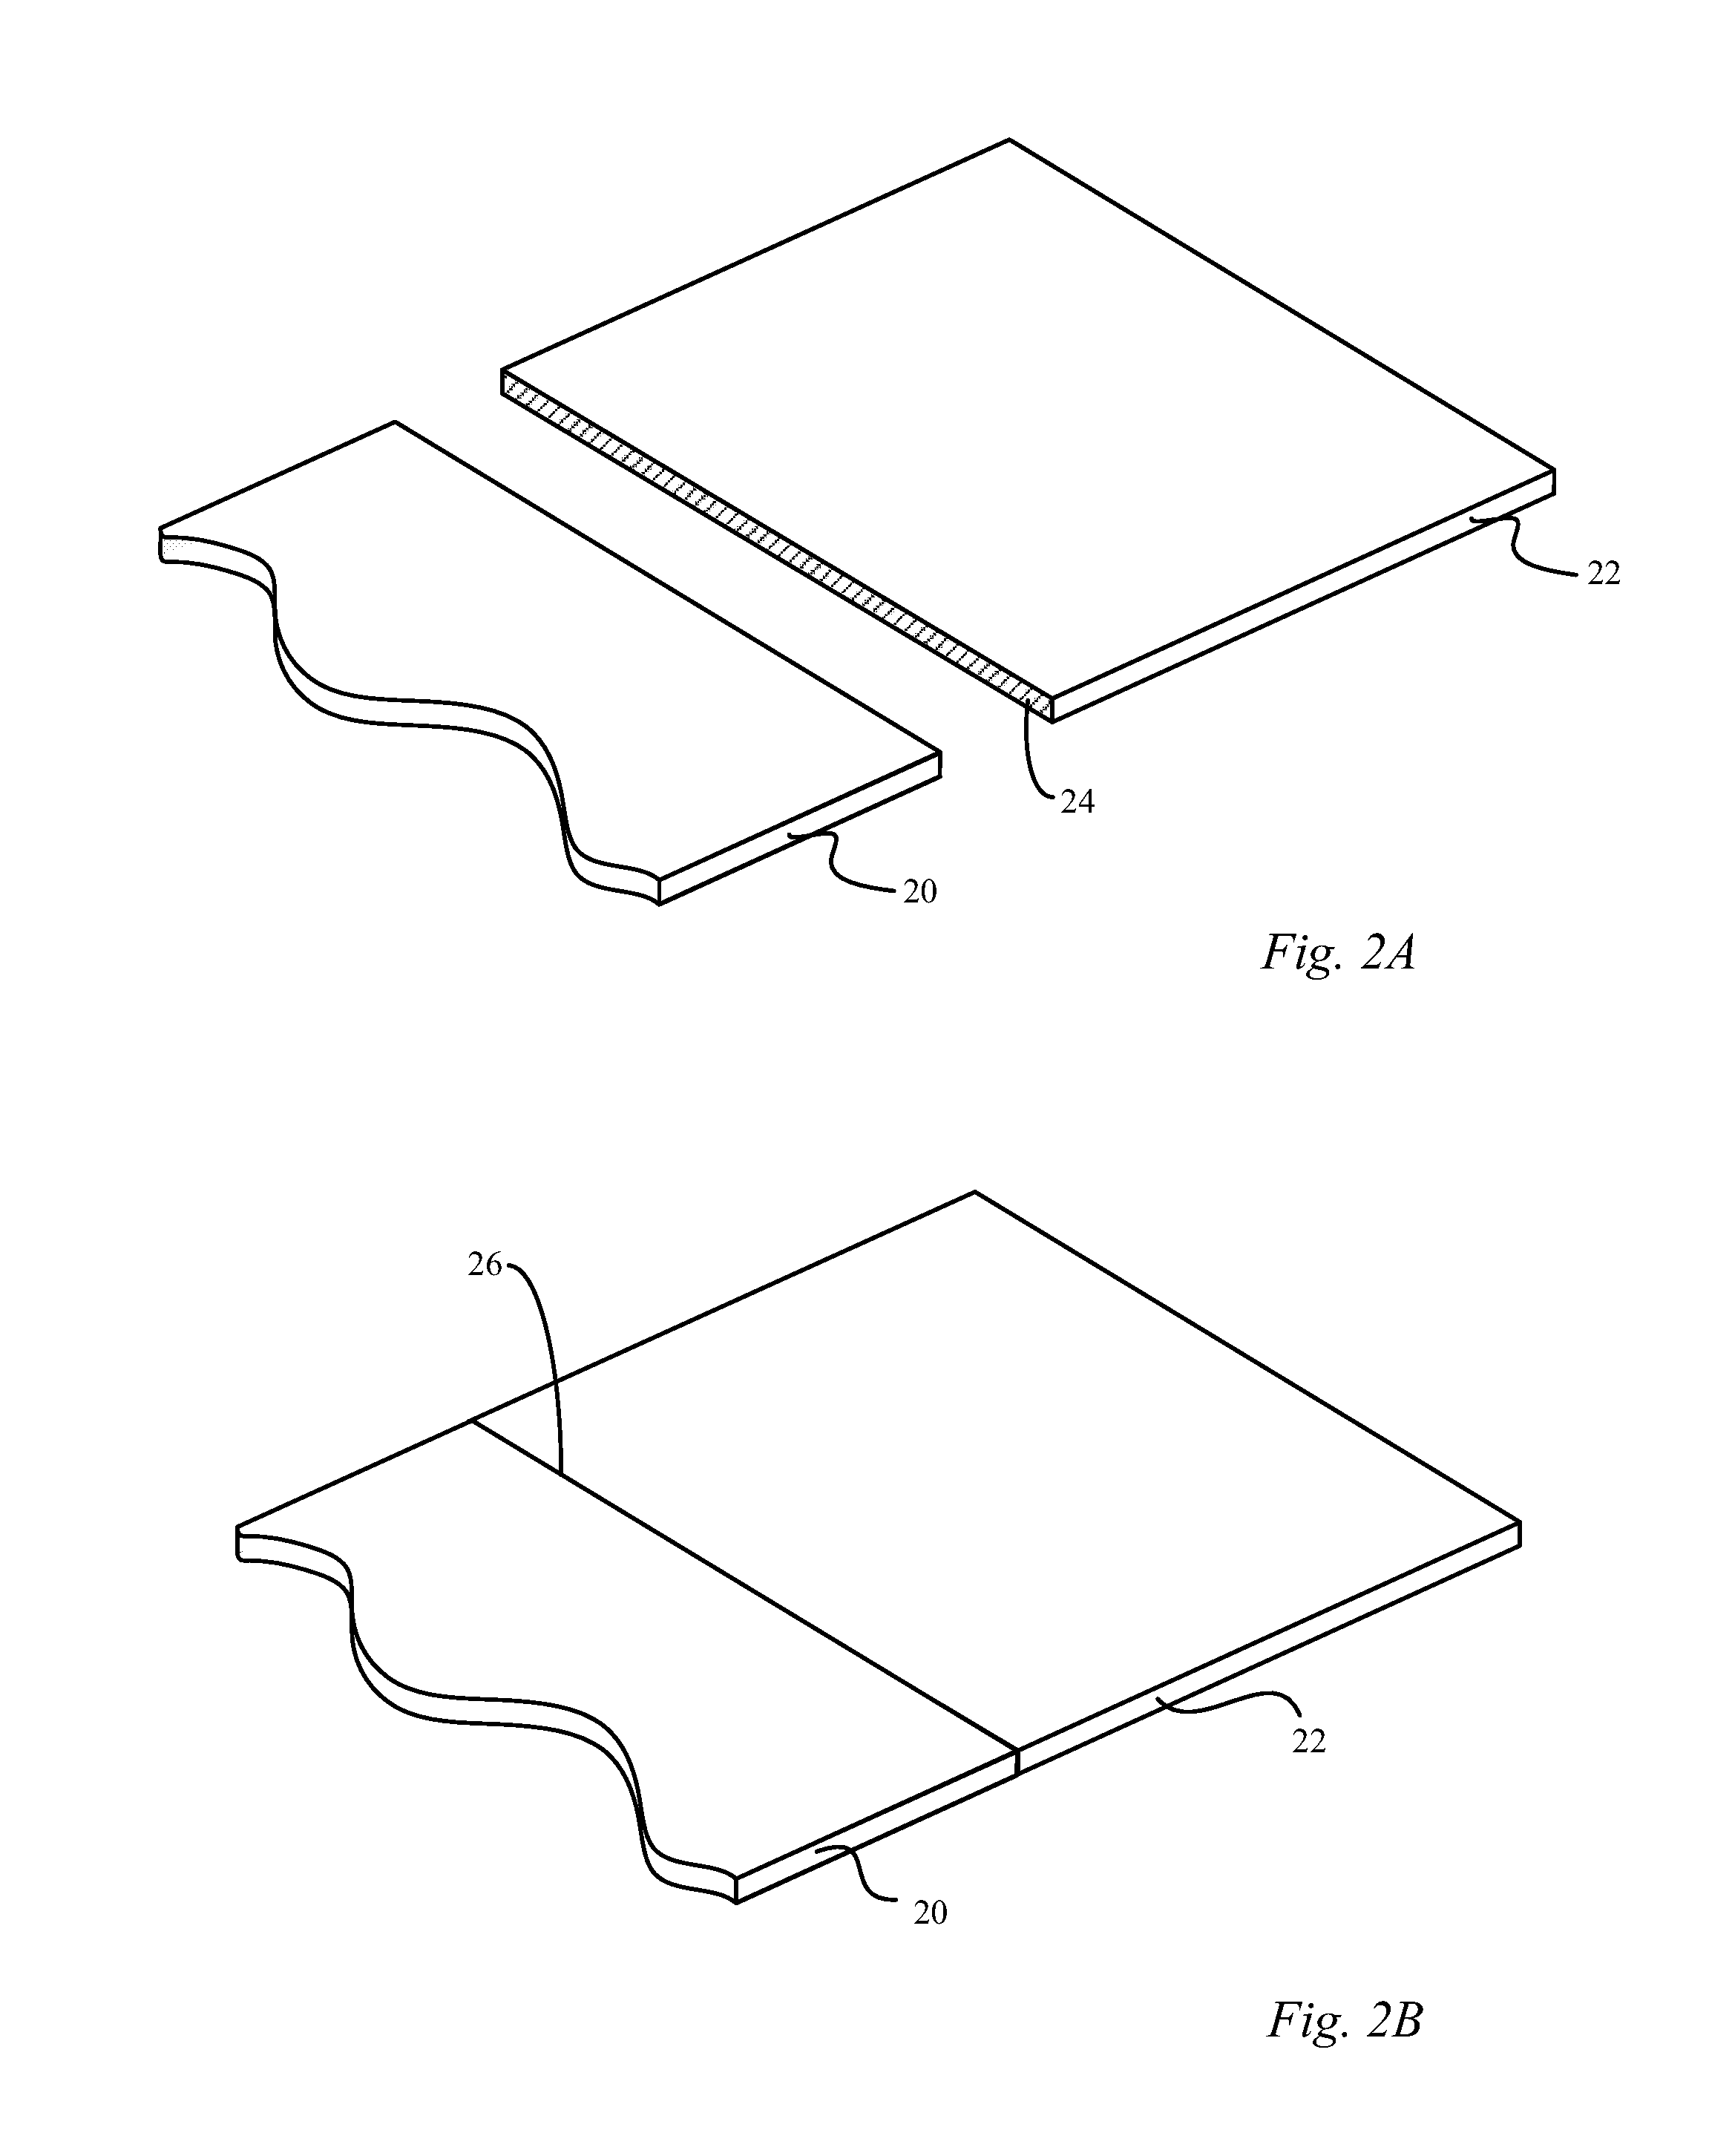 Cover for an electric device